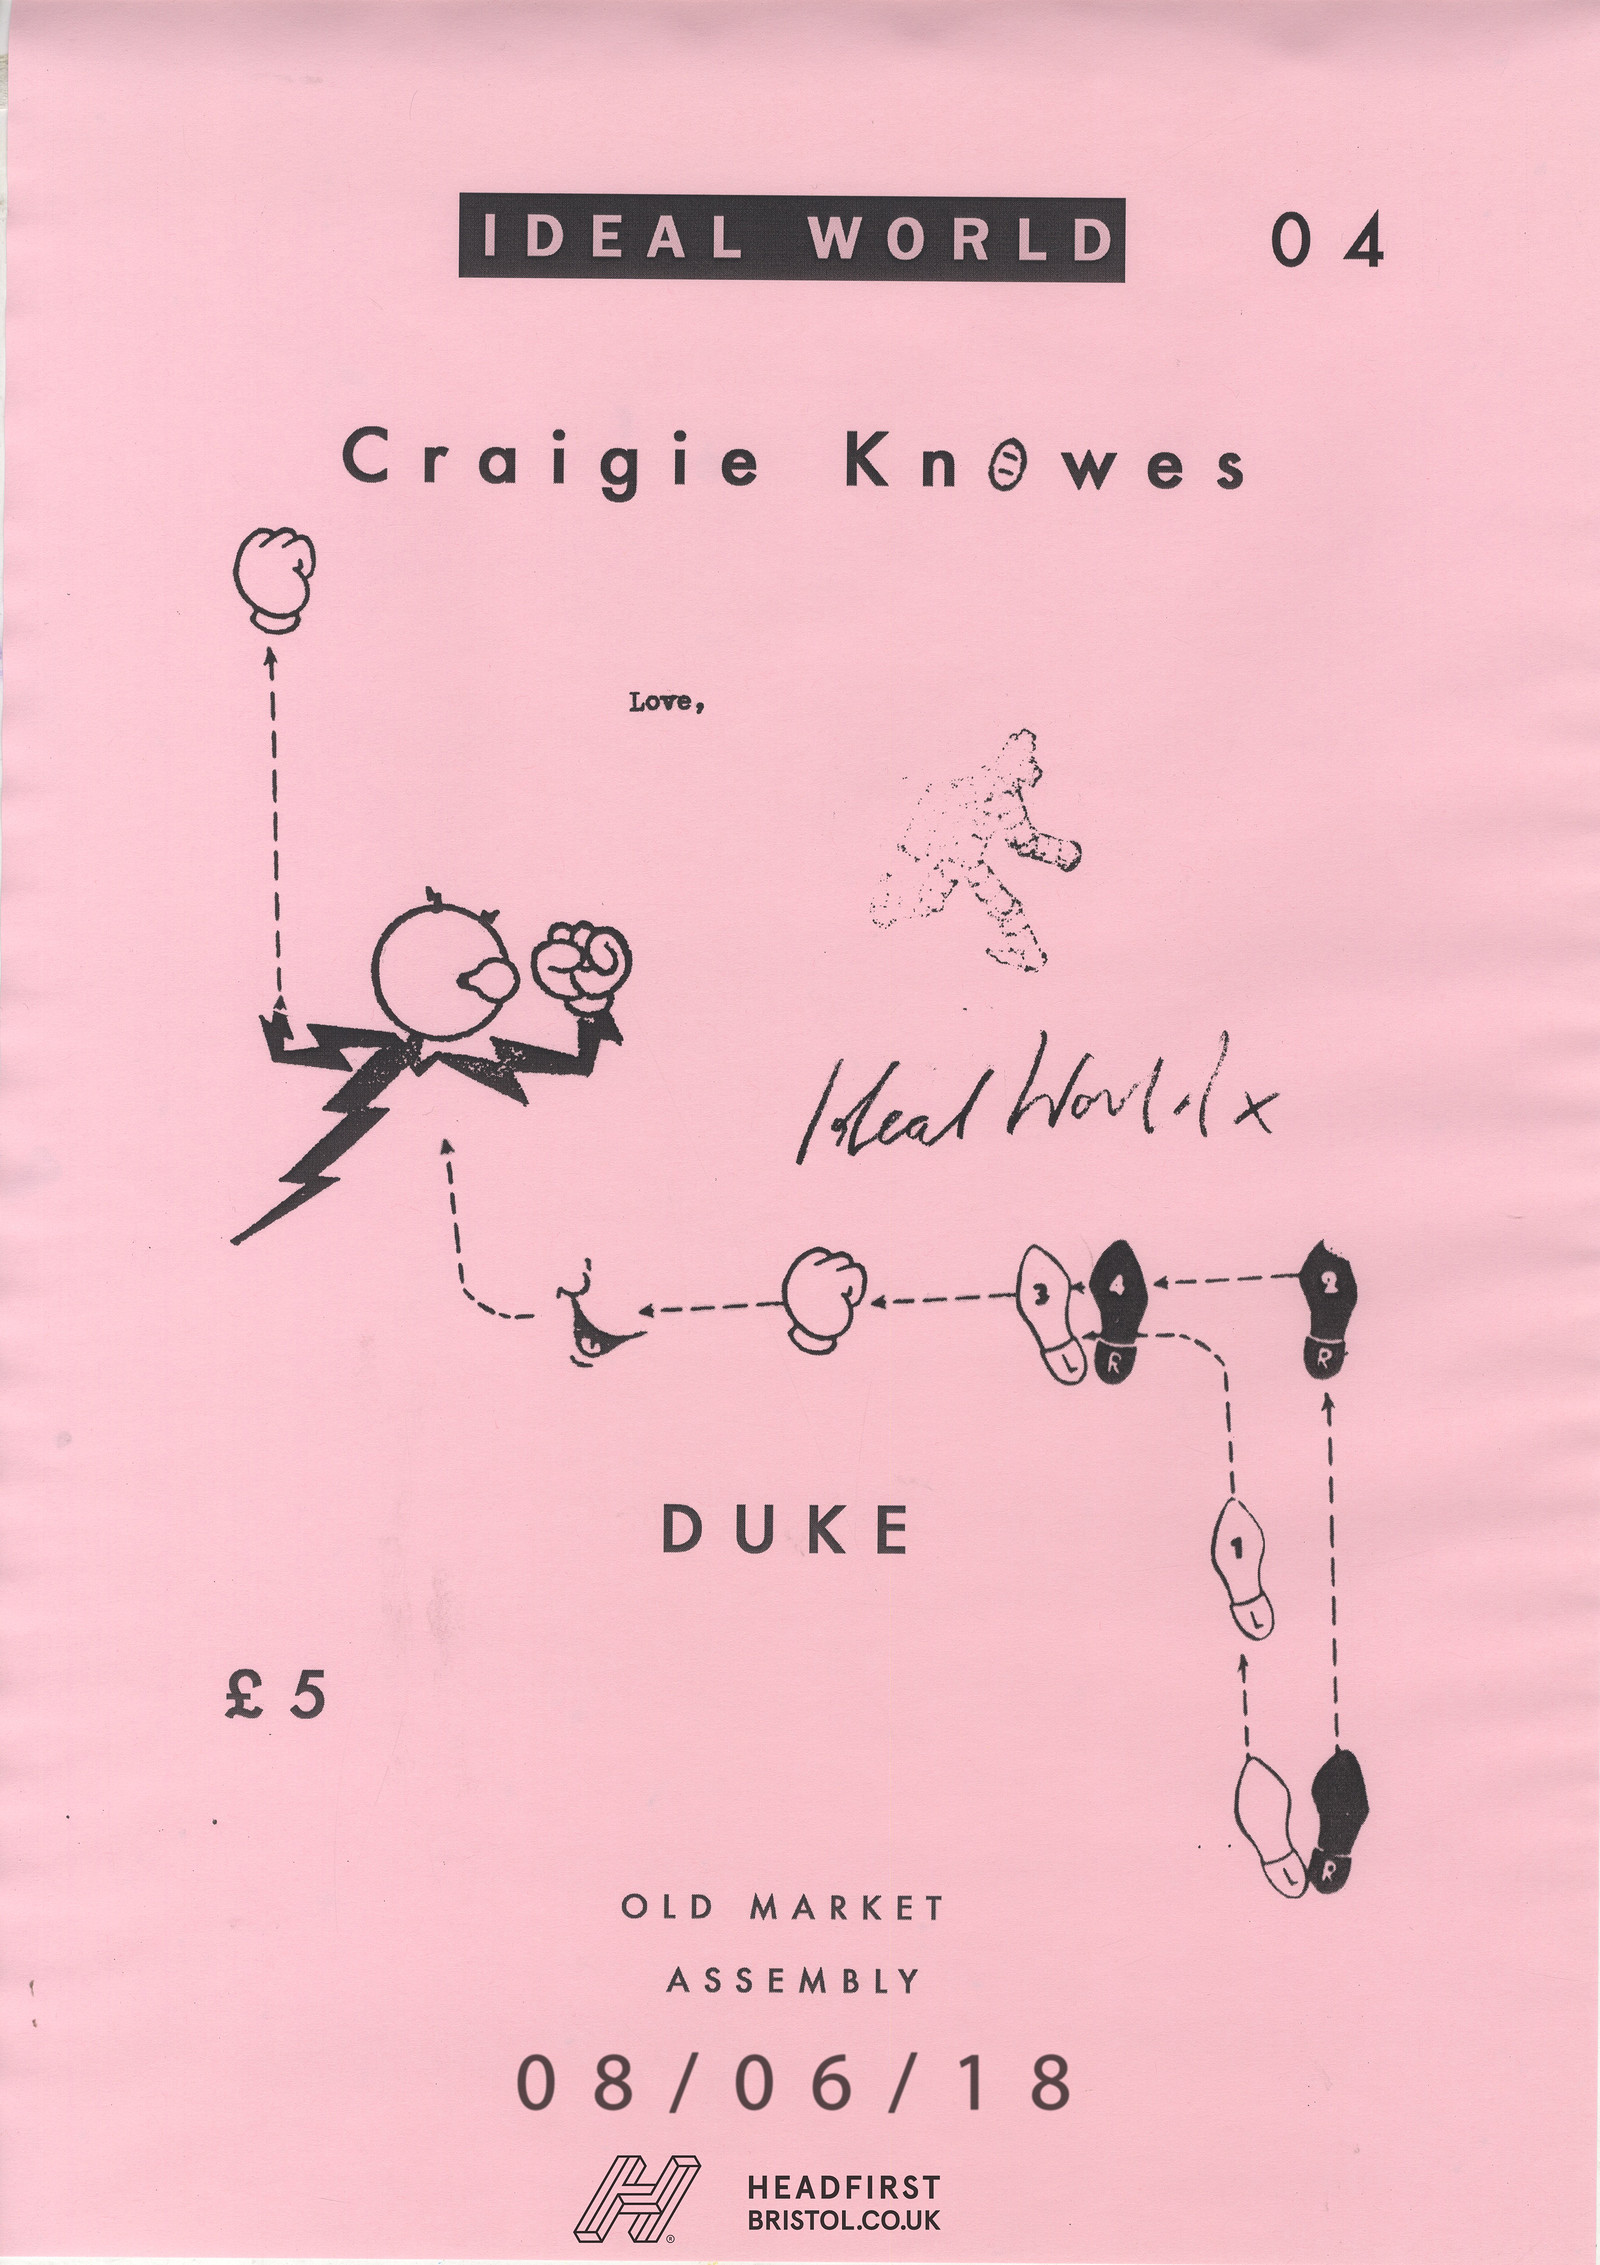 Ideal World 004 W/Craigie Knowes at The Old Market Assembly